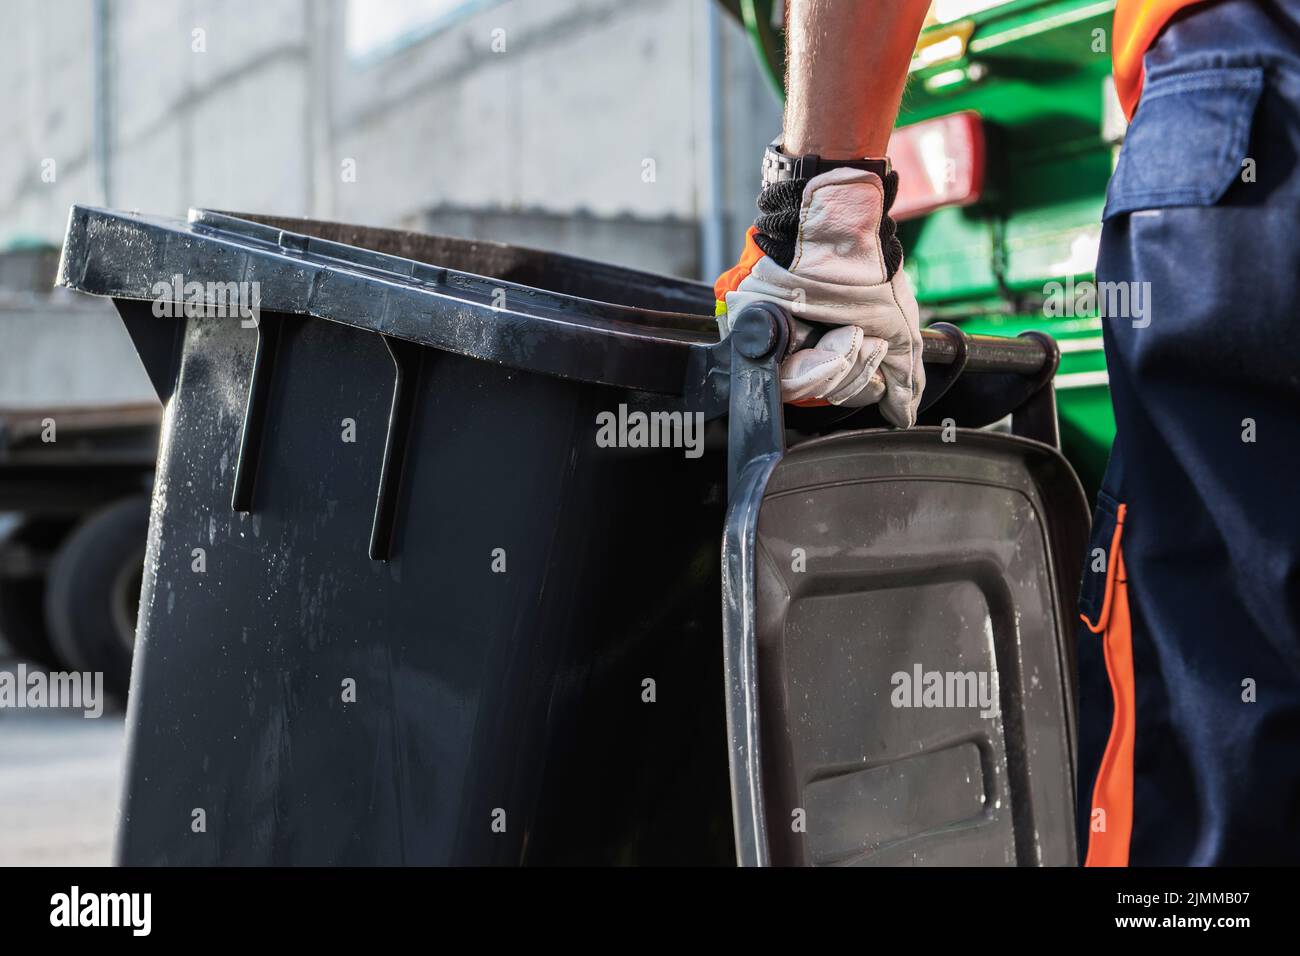 Garbage Truck Worker Moving Clean Black Trash Can Close Up. Waste Management Theme. Stock Photo